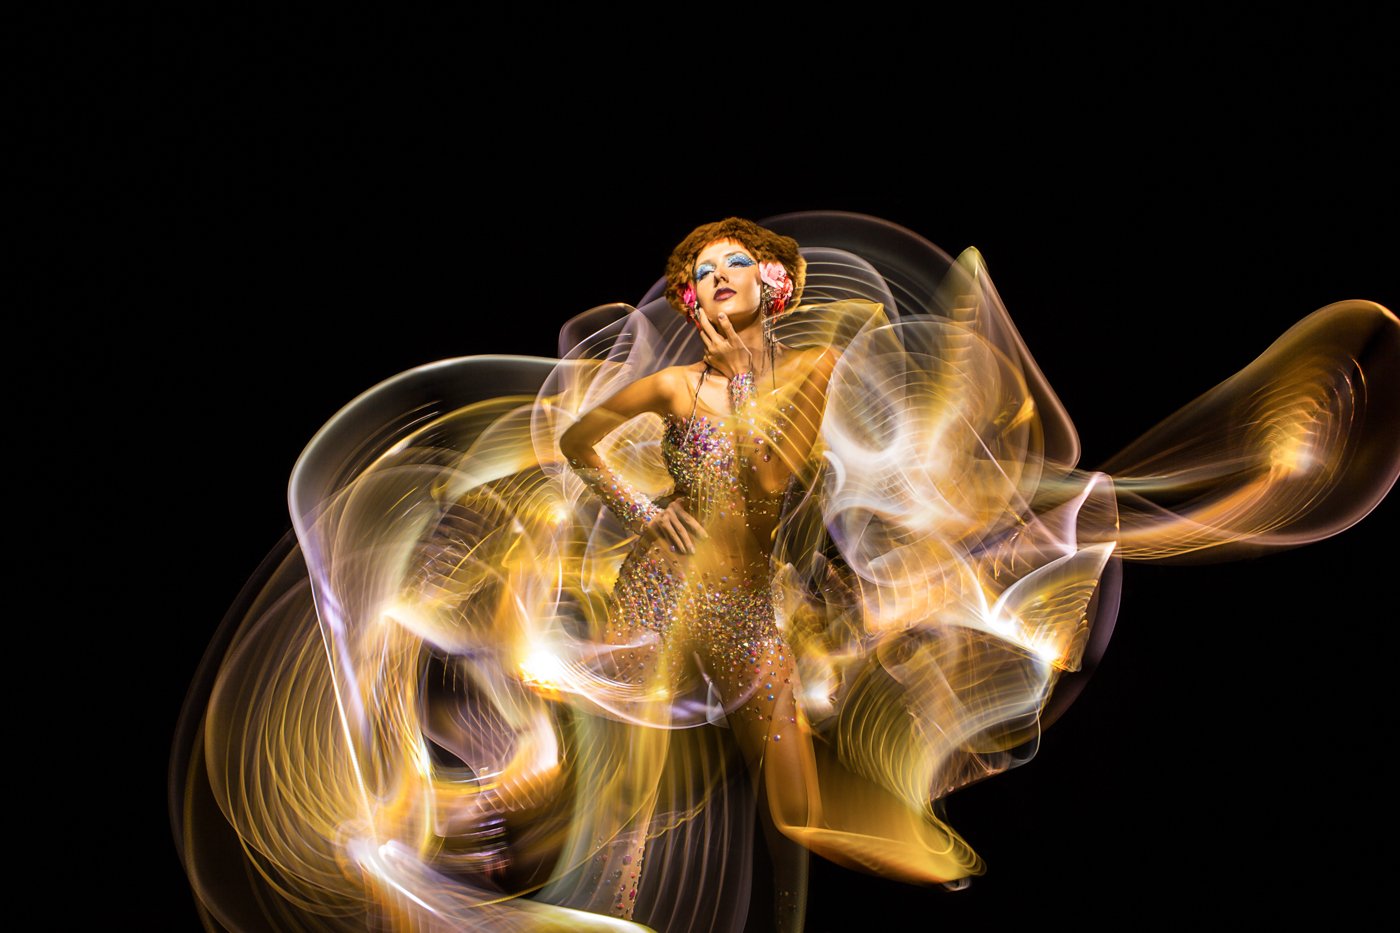 Using 24 Canon 5D Mk II Cameras For These Light Paintings